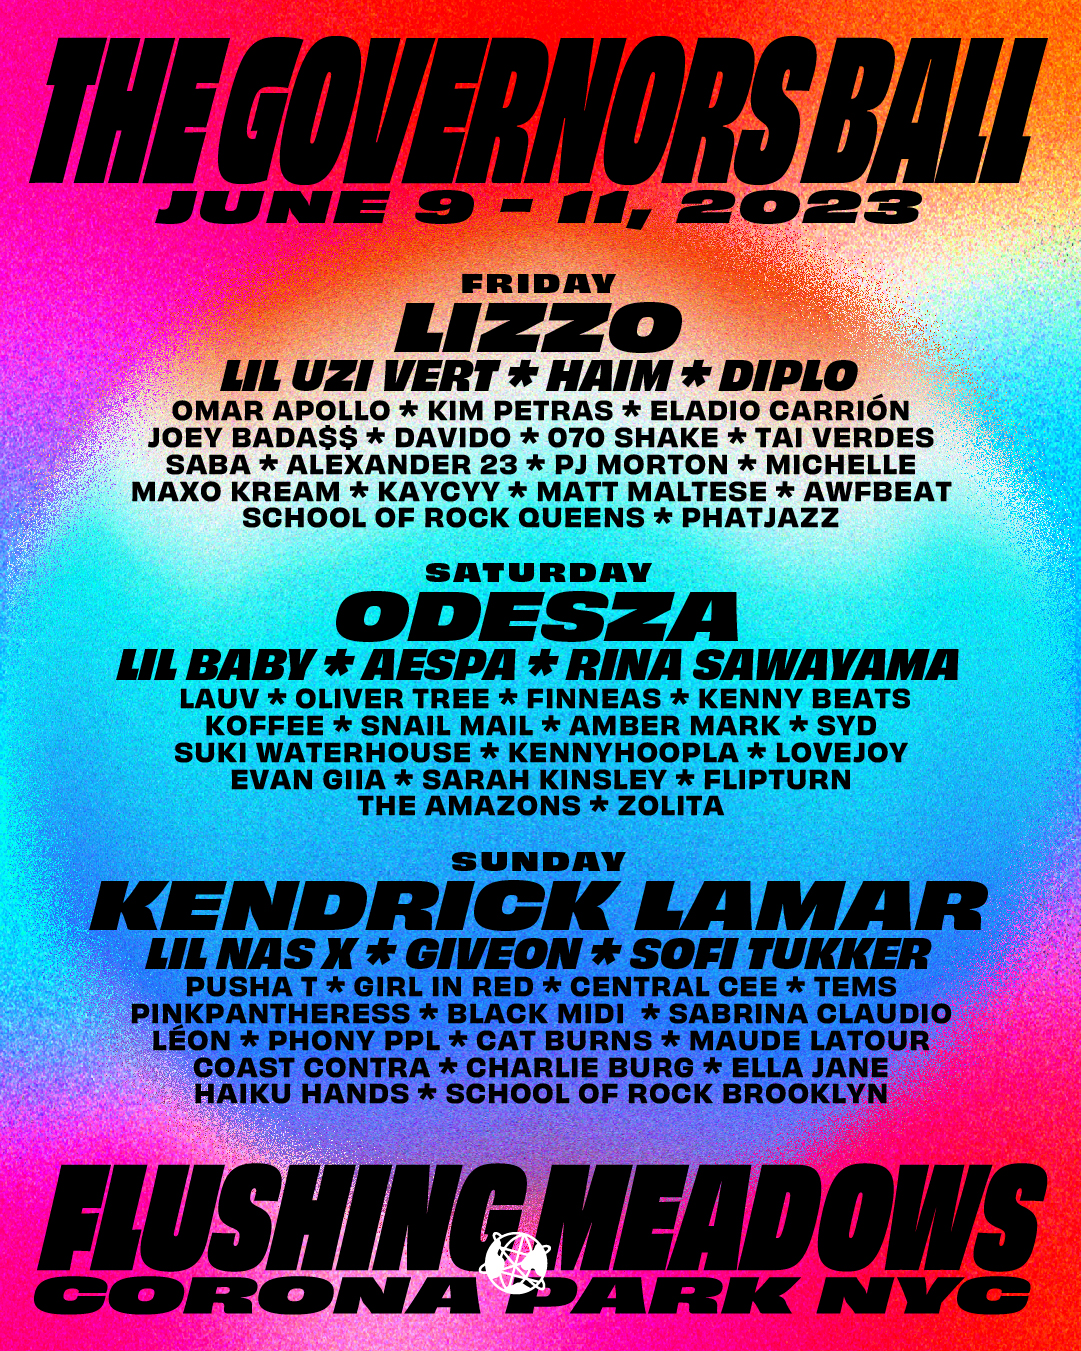 Governors Ball Music Festival 2023 Lineup + Move to Flushing Meadows Corona Park